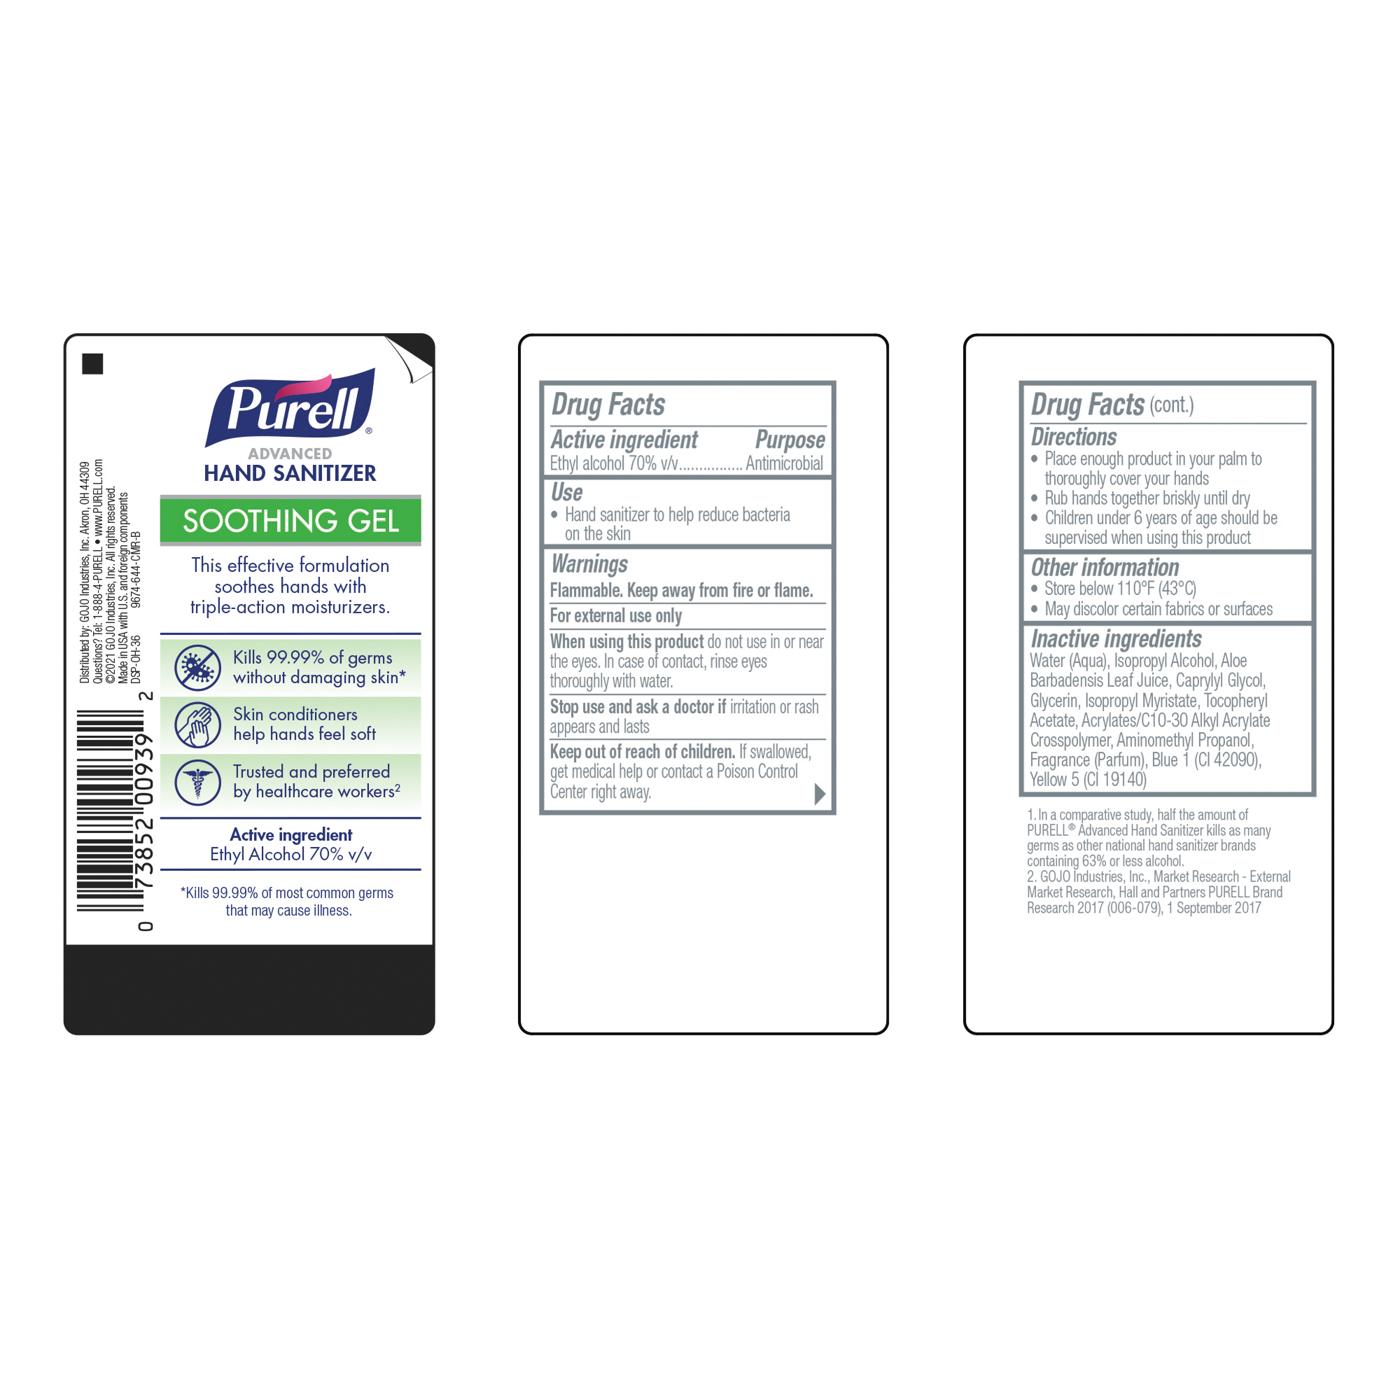 Purell Advanced Hand Sanitizer - Soothing Gel; image 4 of 5